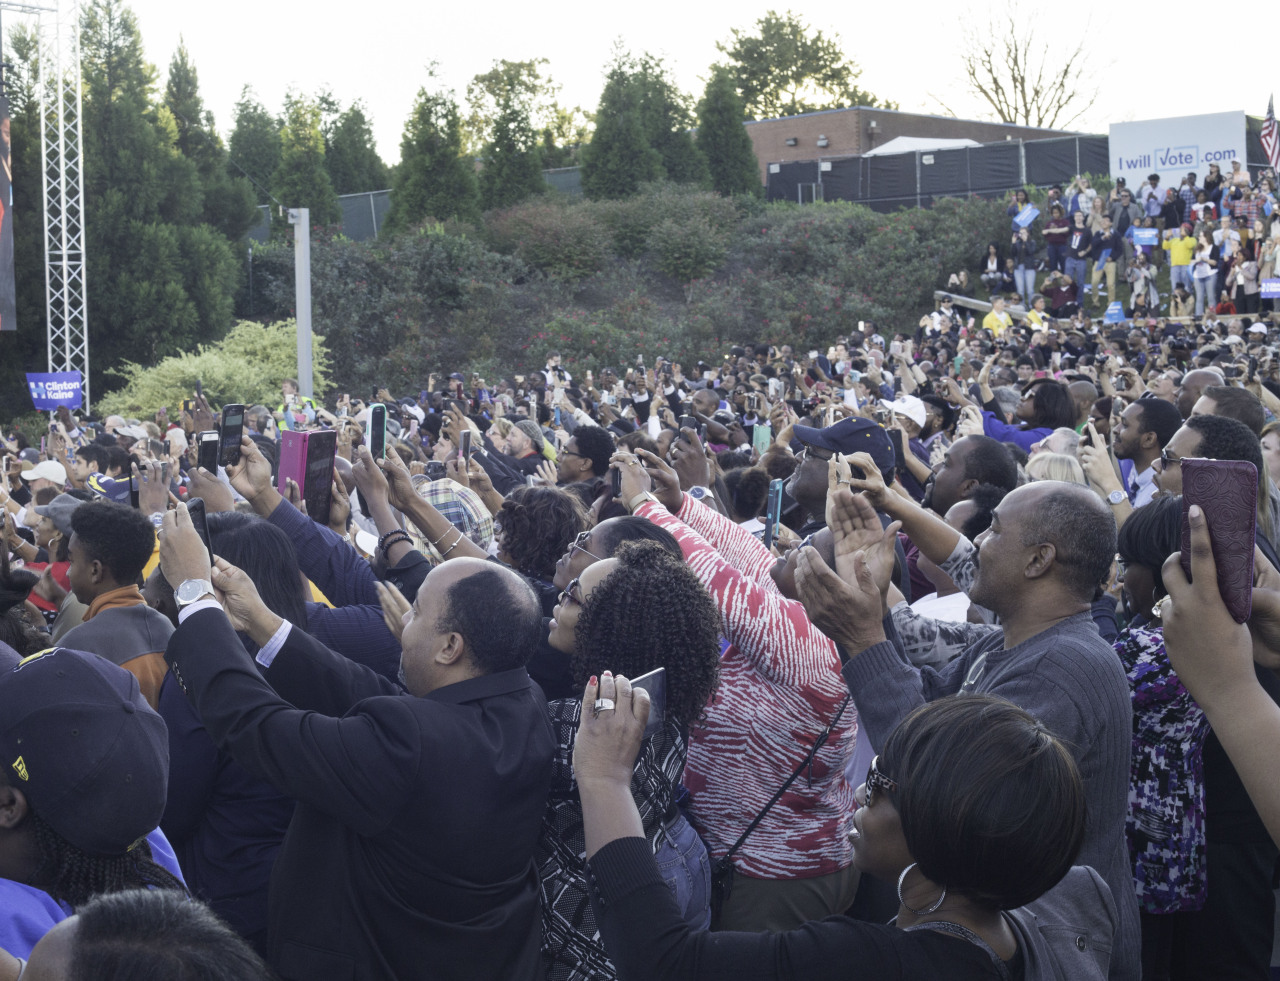 The crowd in Greensboro, North Carolina caught up in the moment with cellphones out as Obama walks out getting ready to speak.